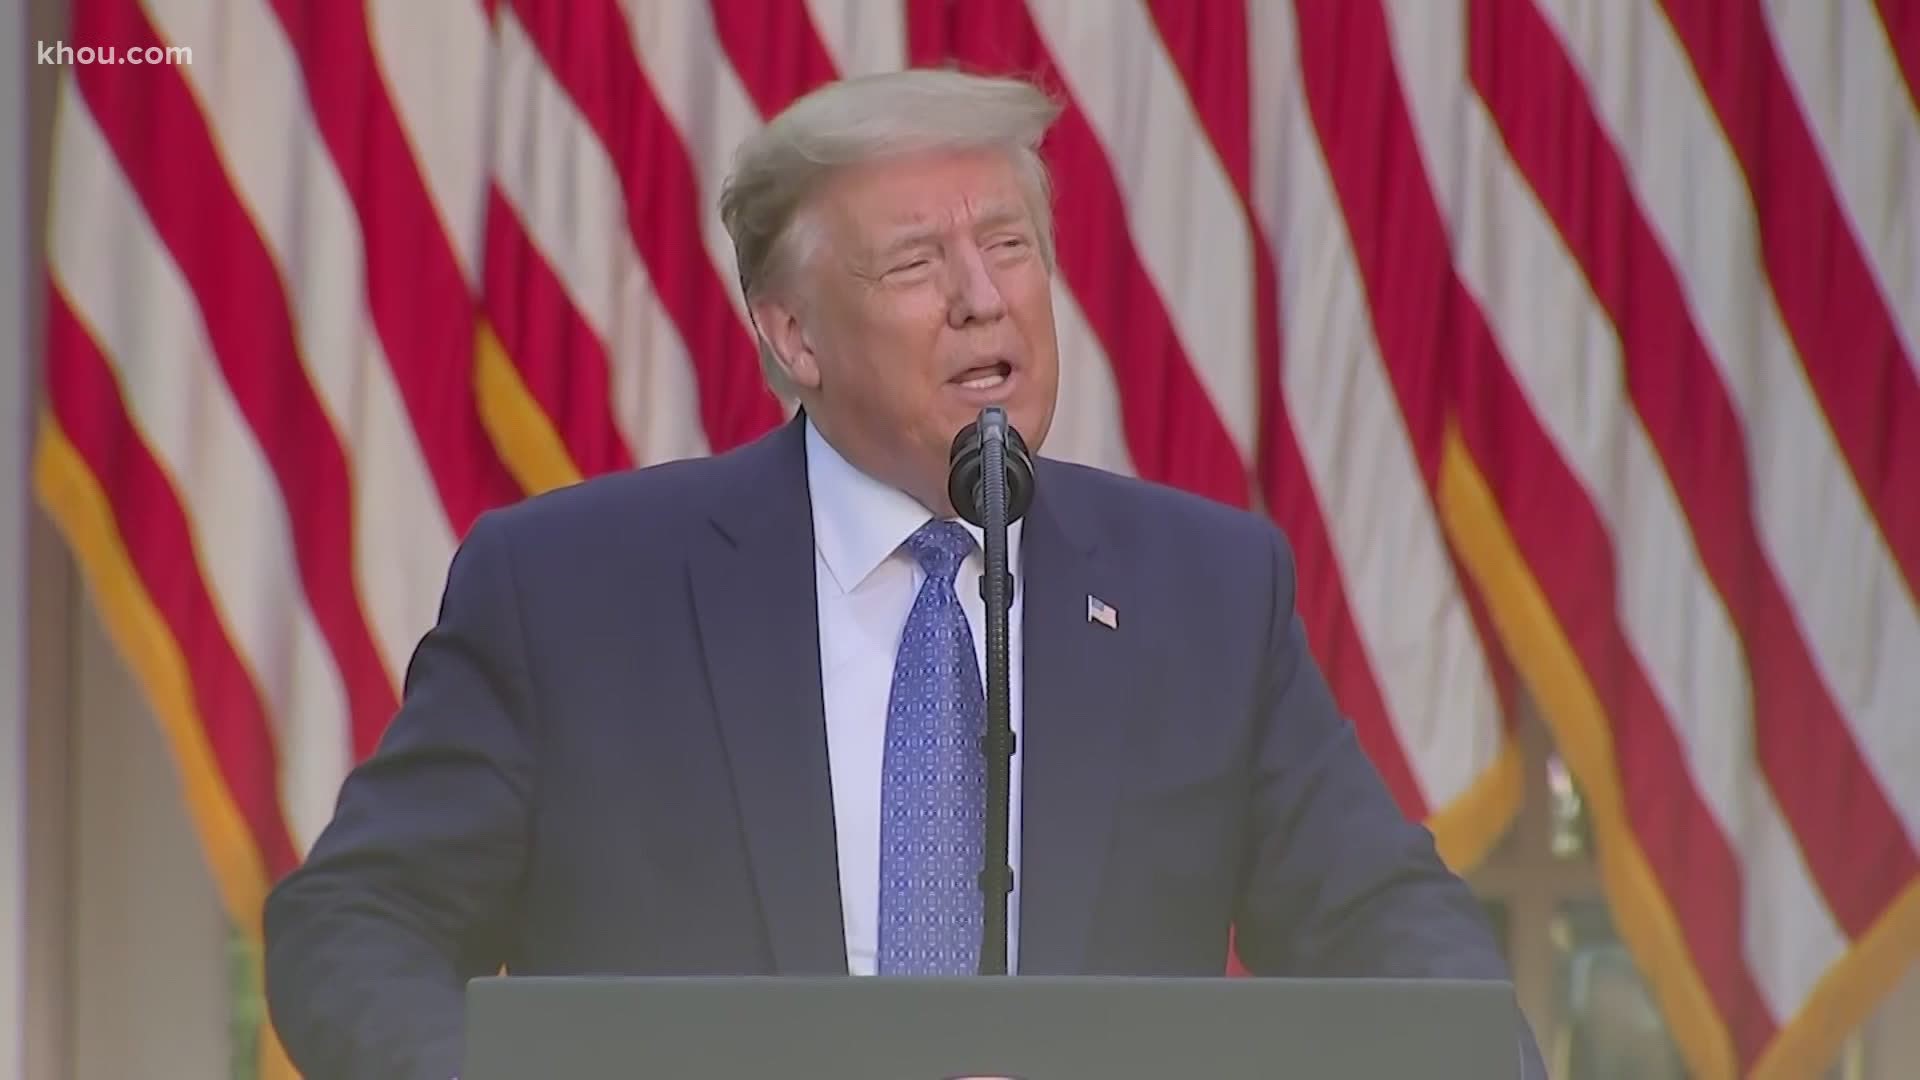 President Trump sent a message to mayors and governors: Get the violence under control or he will get the military to do it.